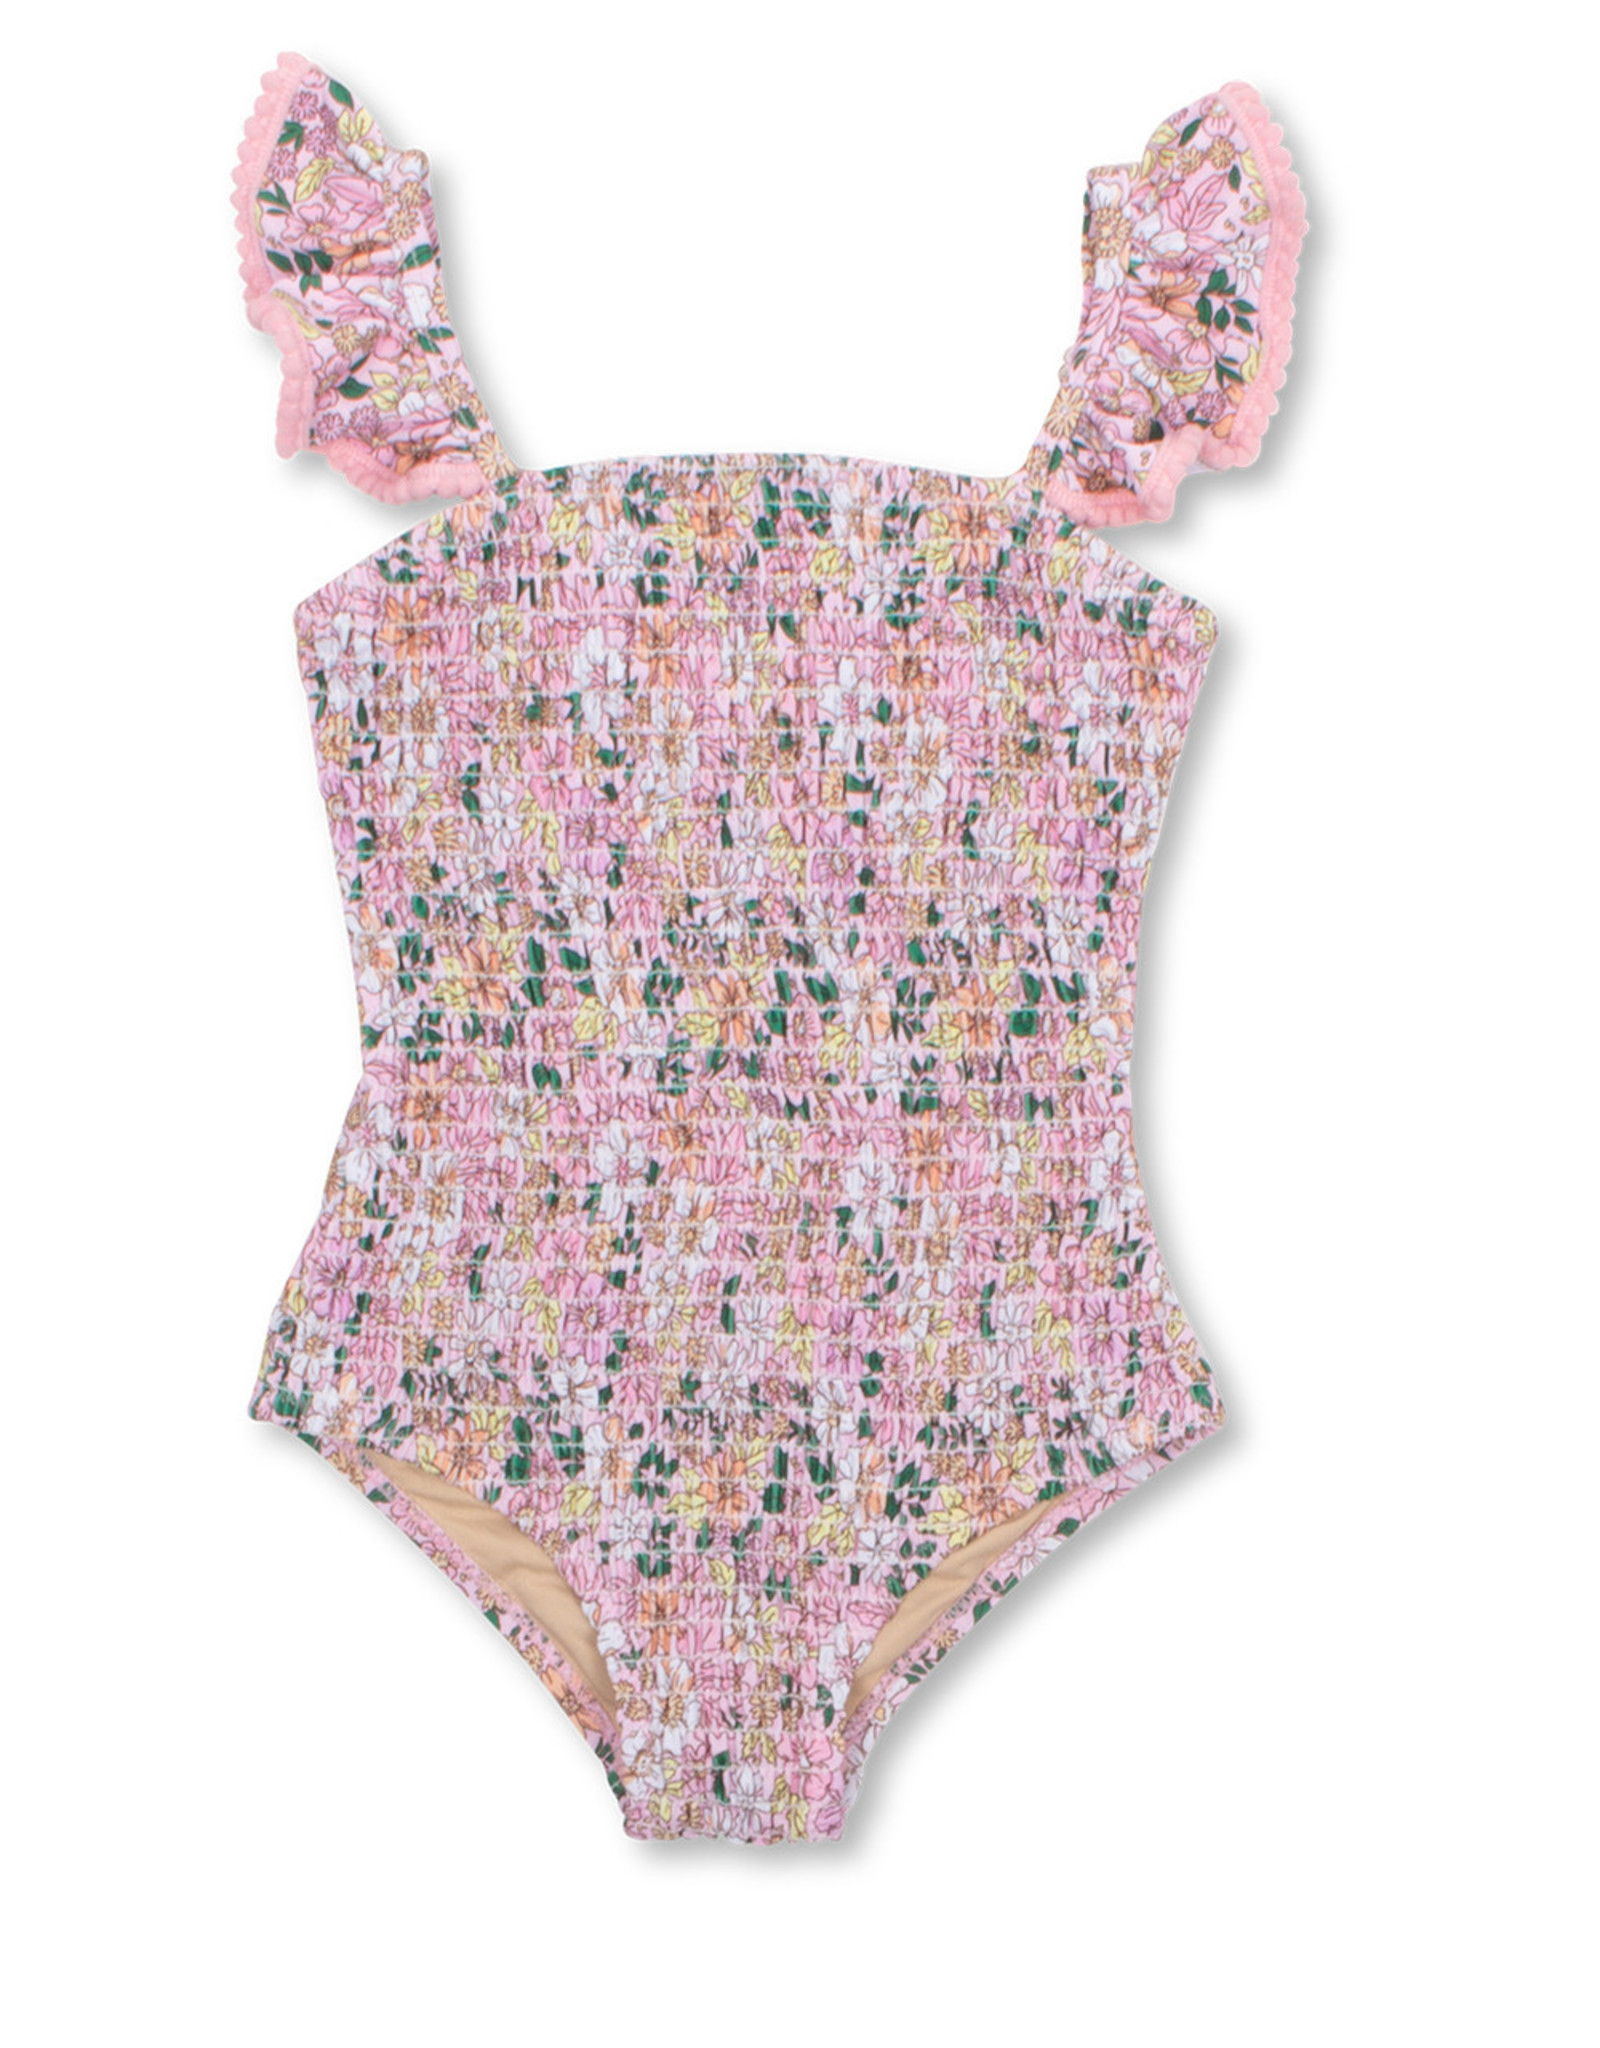 Shade Critters smocked onepiece- pink ditsy floral